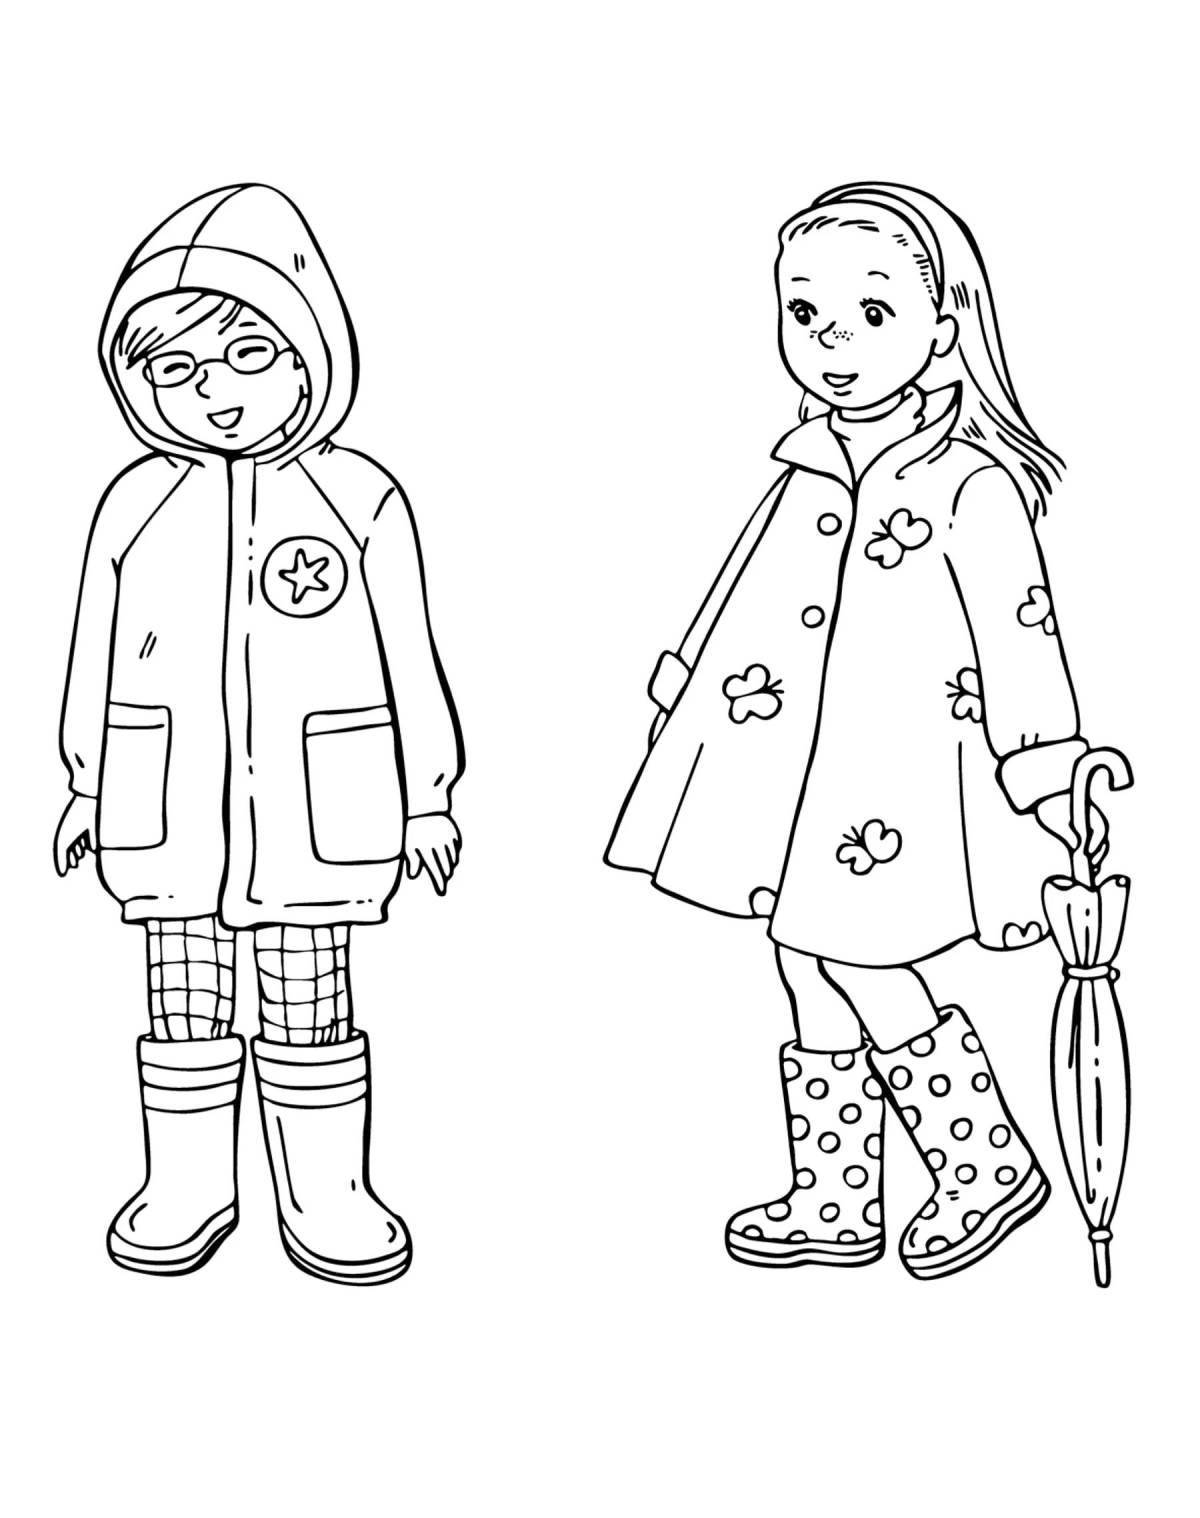 Clothing coloring page